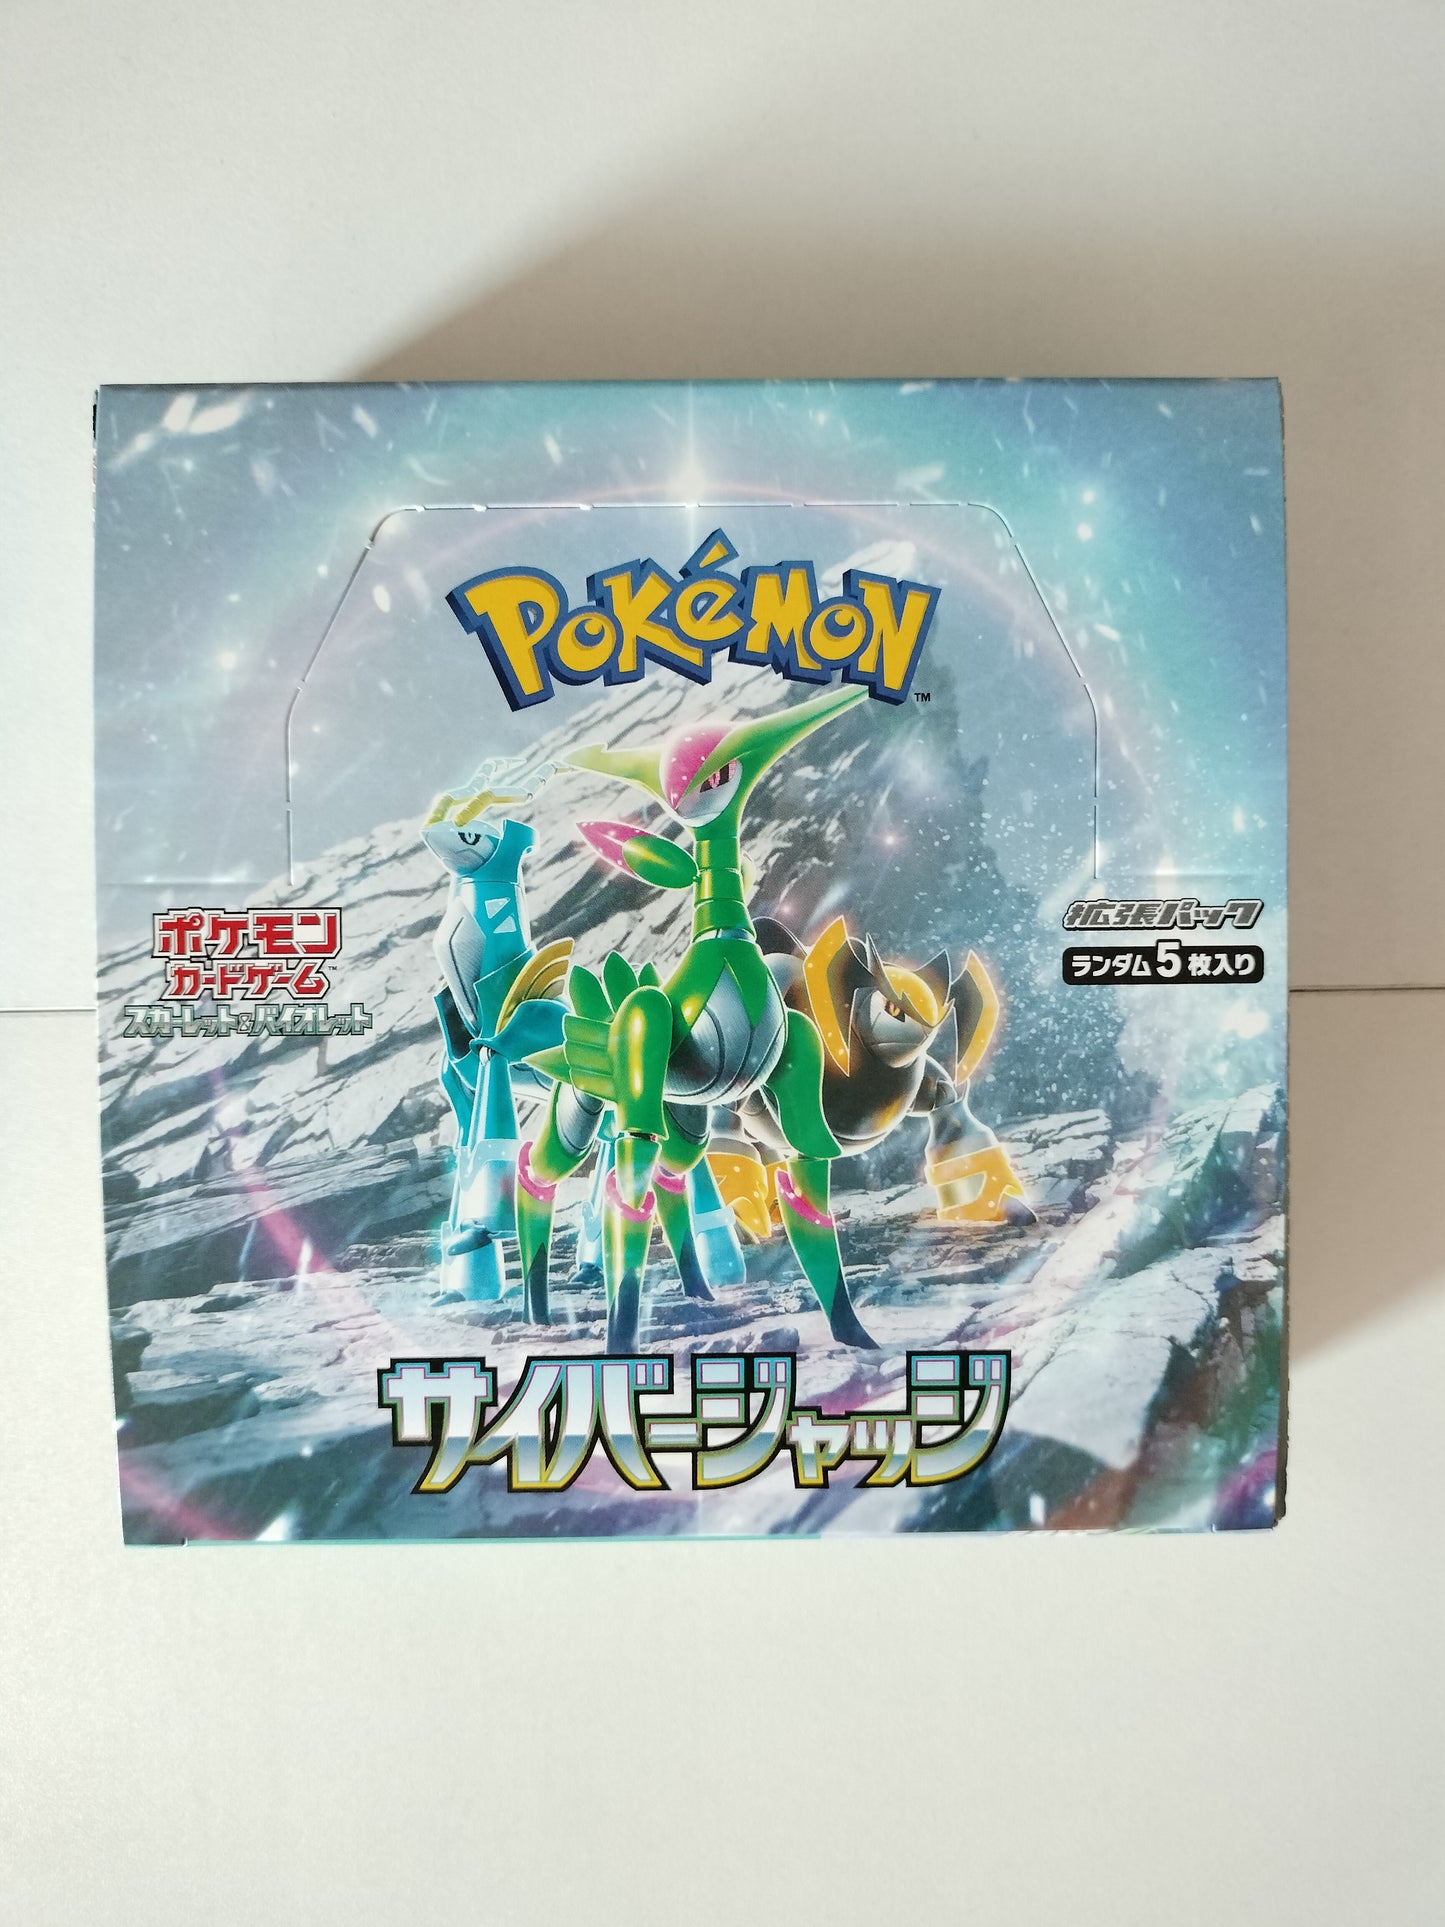 SEALED Japanese SV5M Cyber Judge Booster Box